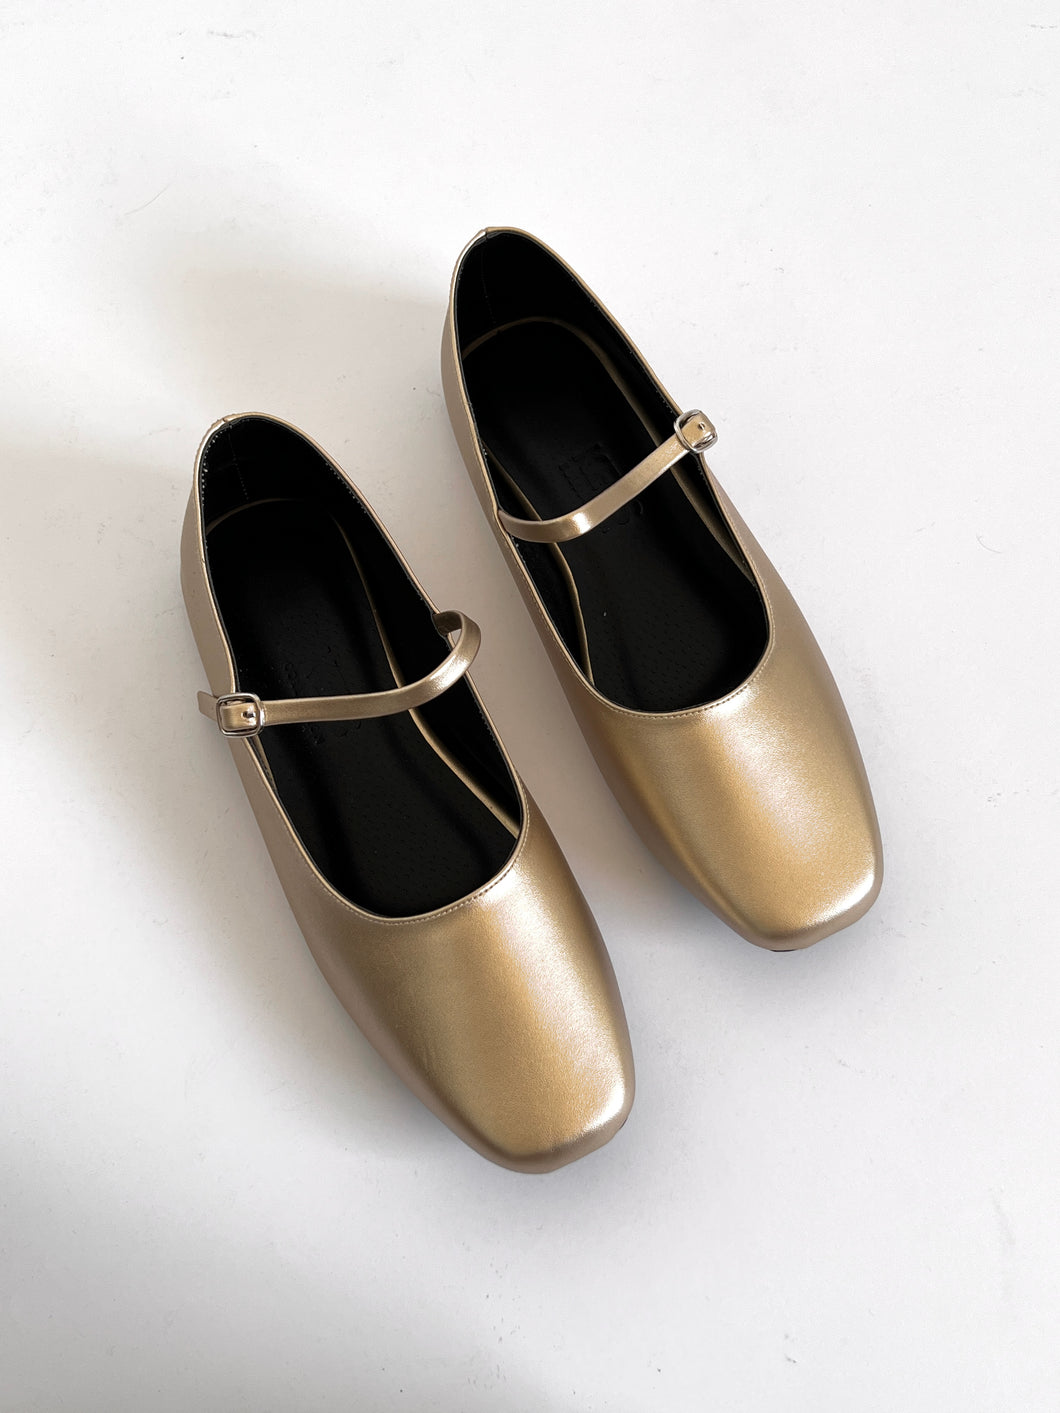 The Mia Shoes Gold